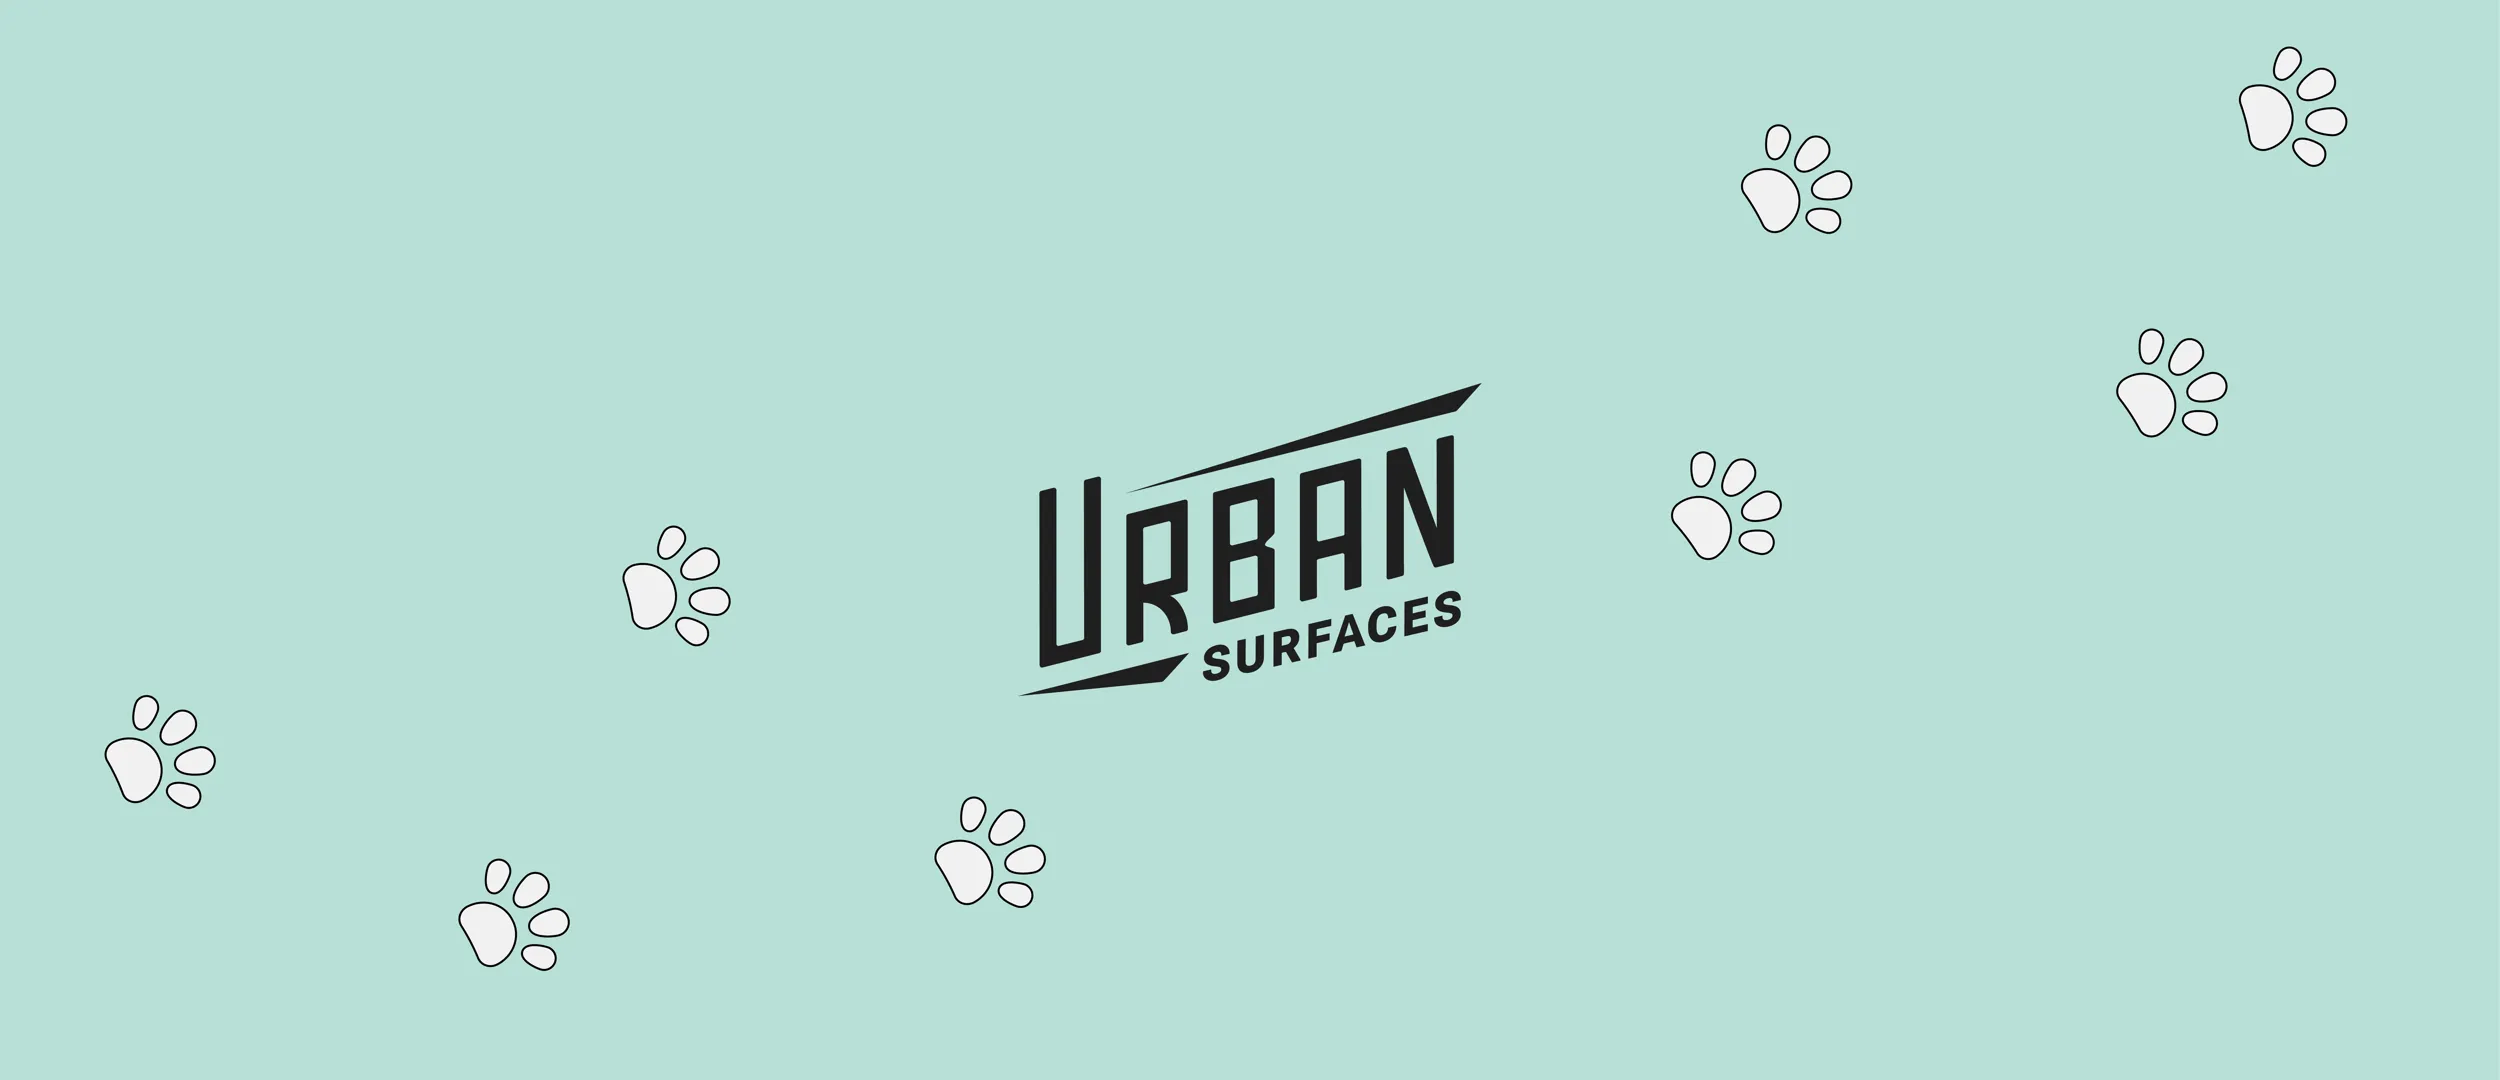 Urban Surfaces logo in the midst of Paw Prints on a green background.